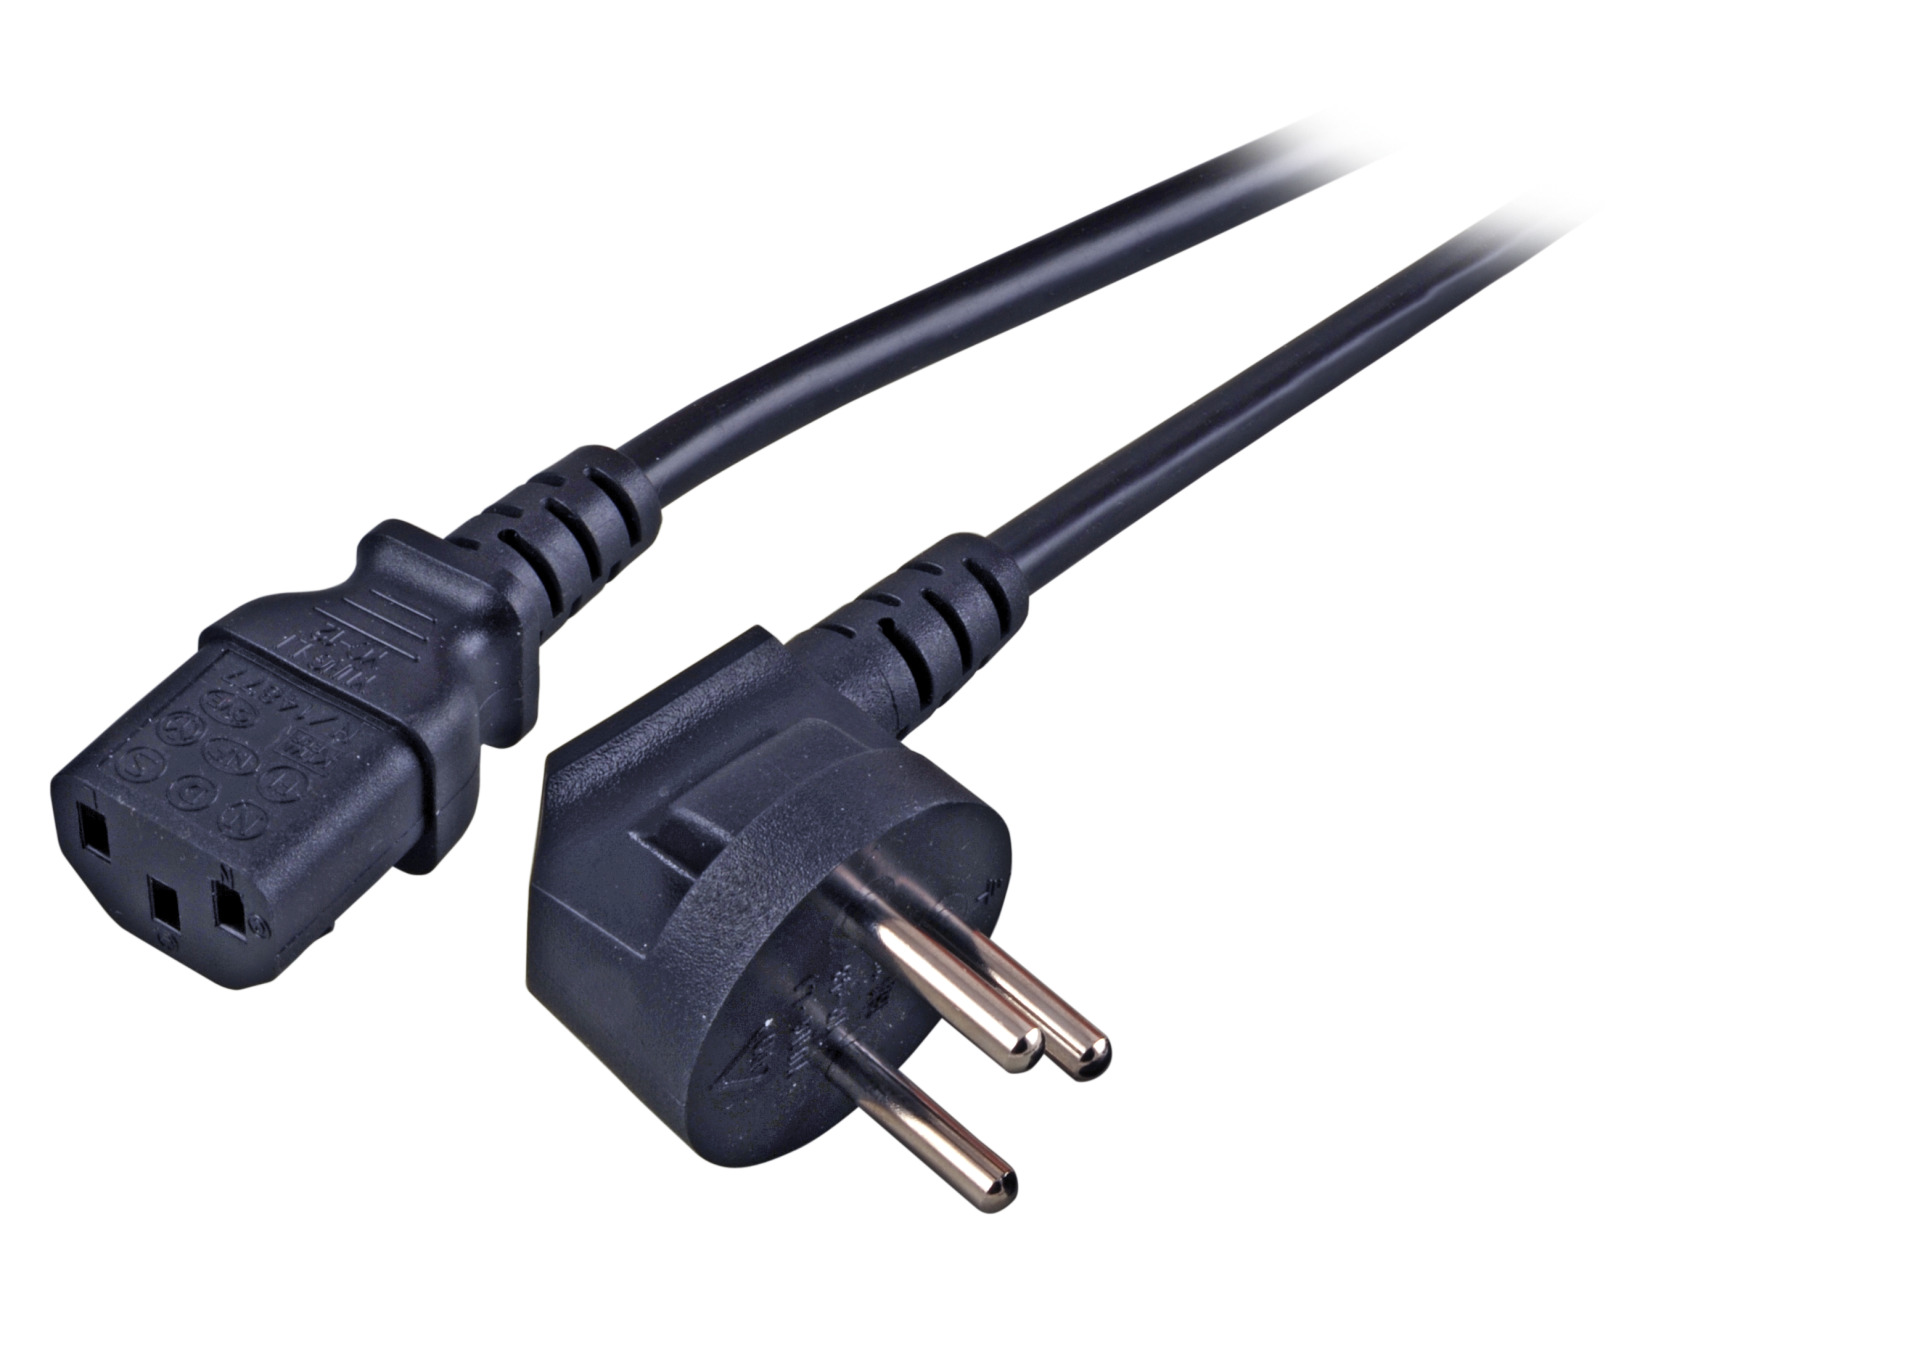 Power Cable Israel - C13 180°, Black, 1.8 m, 3 x 0.75 mm²